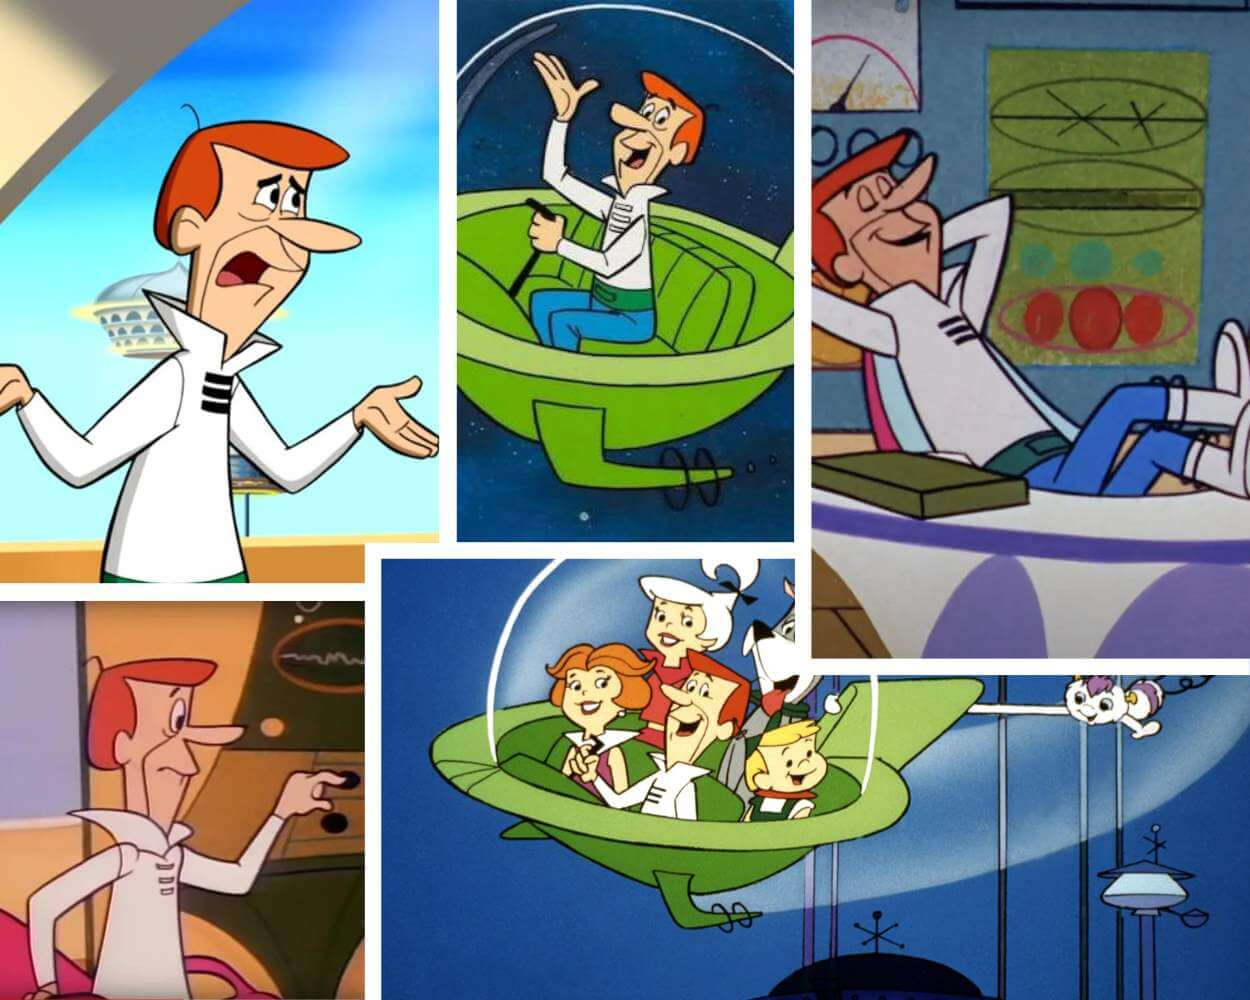 George Jetson Is a Main Character In The Jetsons